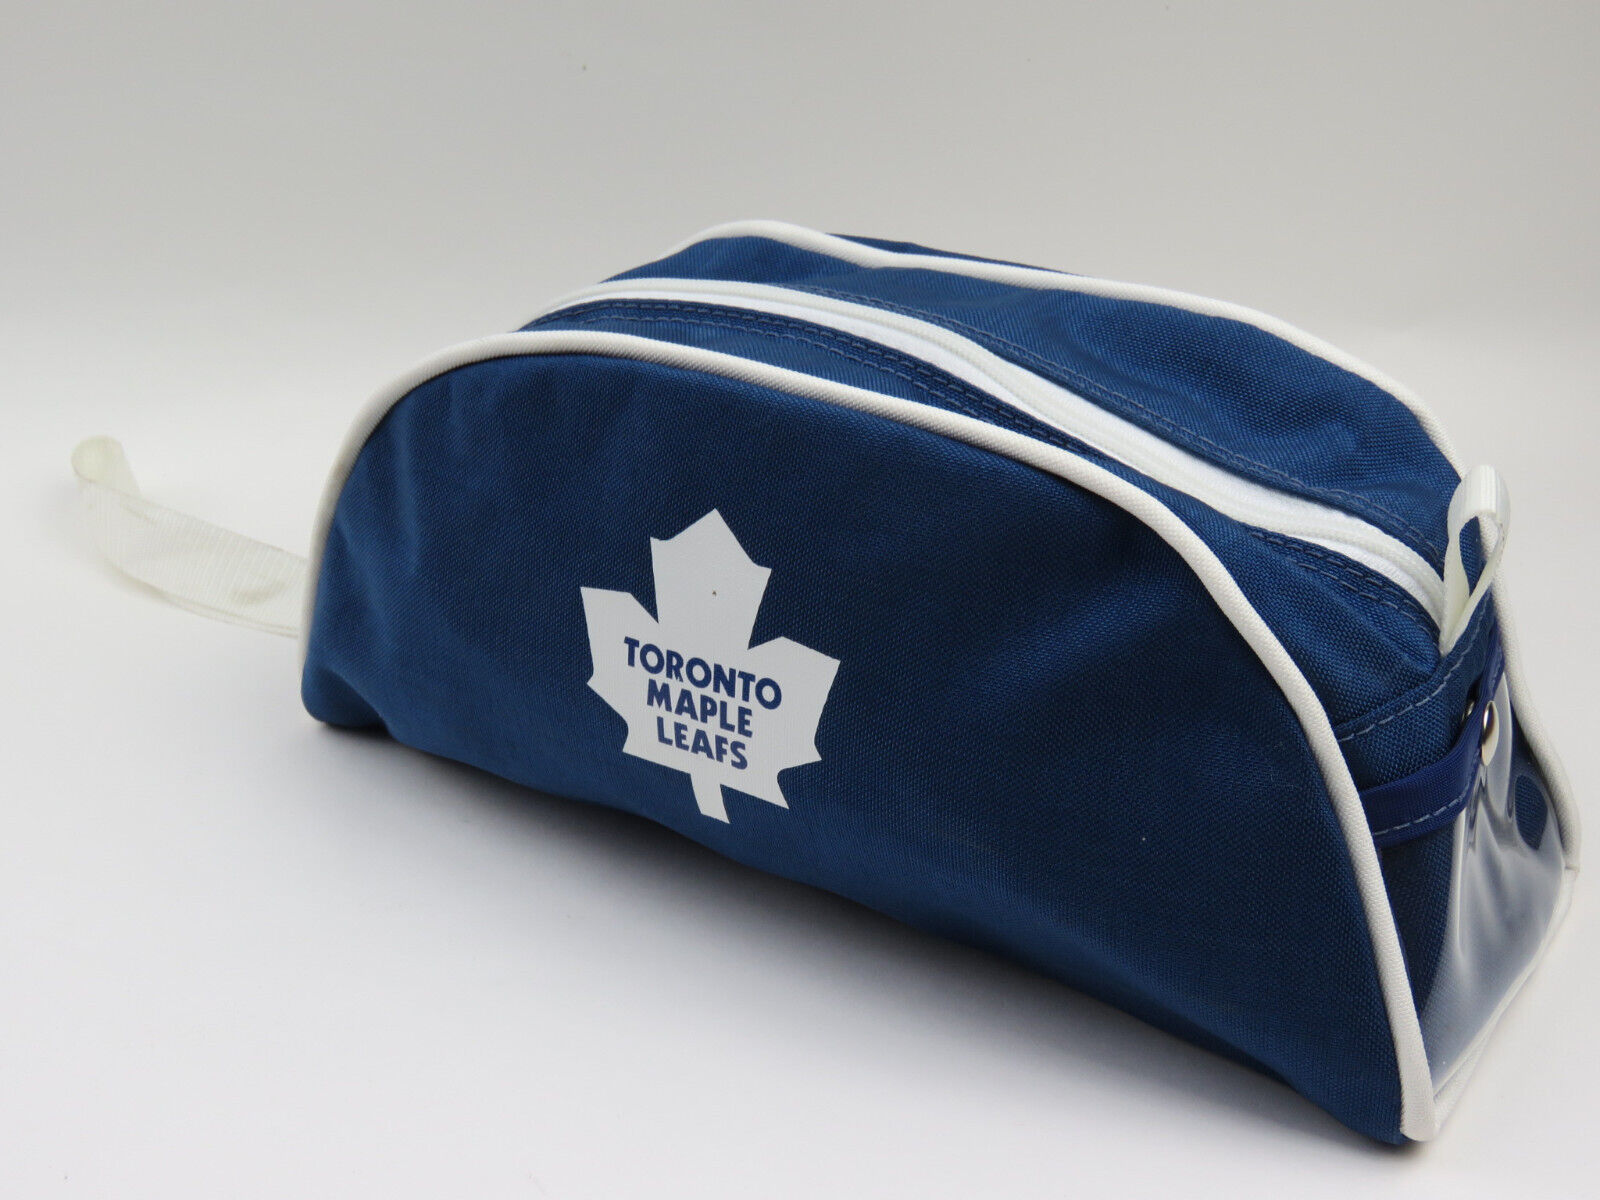 Jrz Toronto Maple Leafs Nhl Pro Stock Team Issued Hockey Player Toiletry Bag